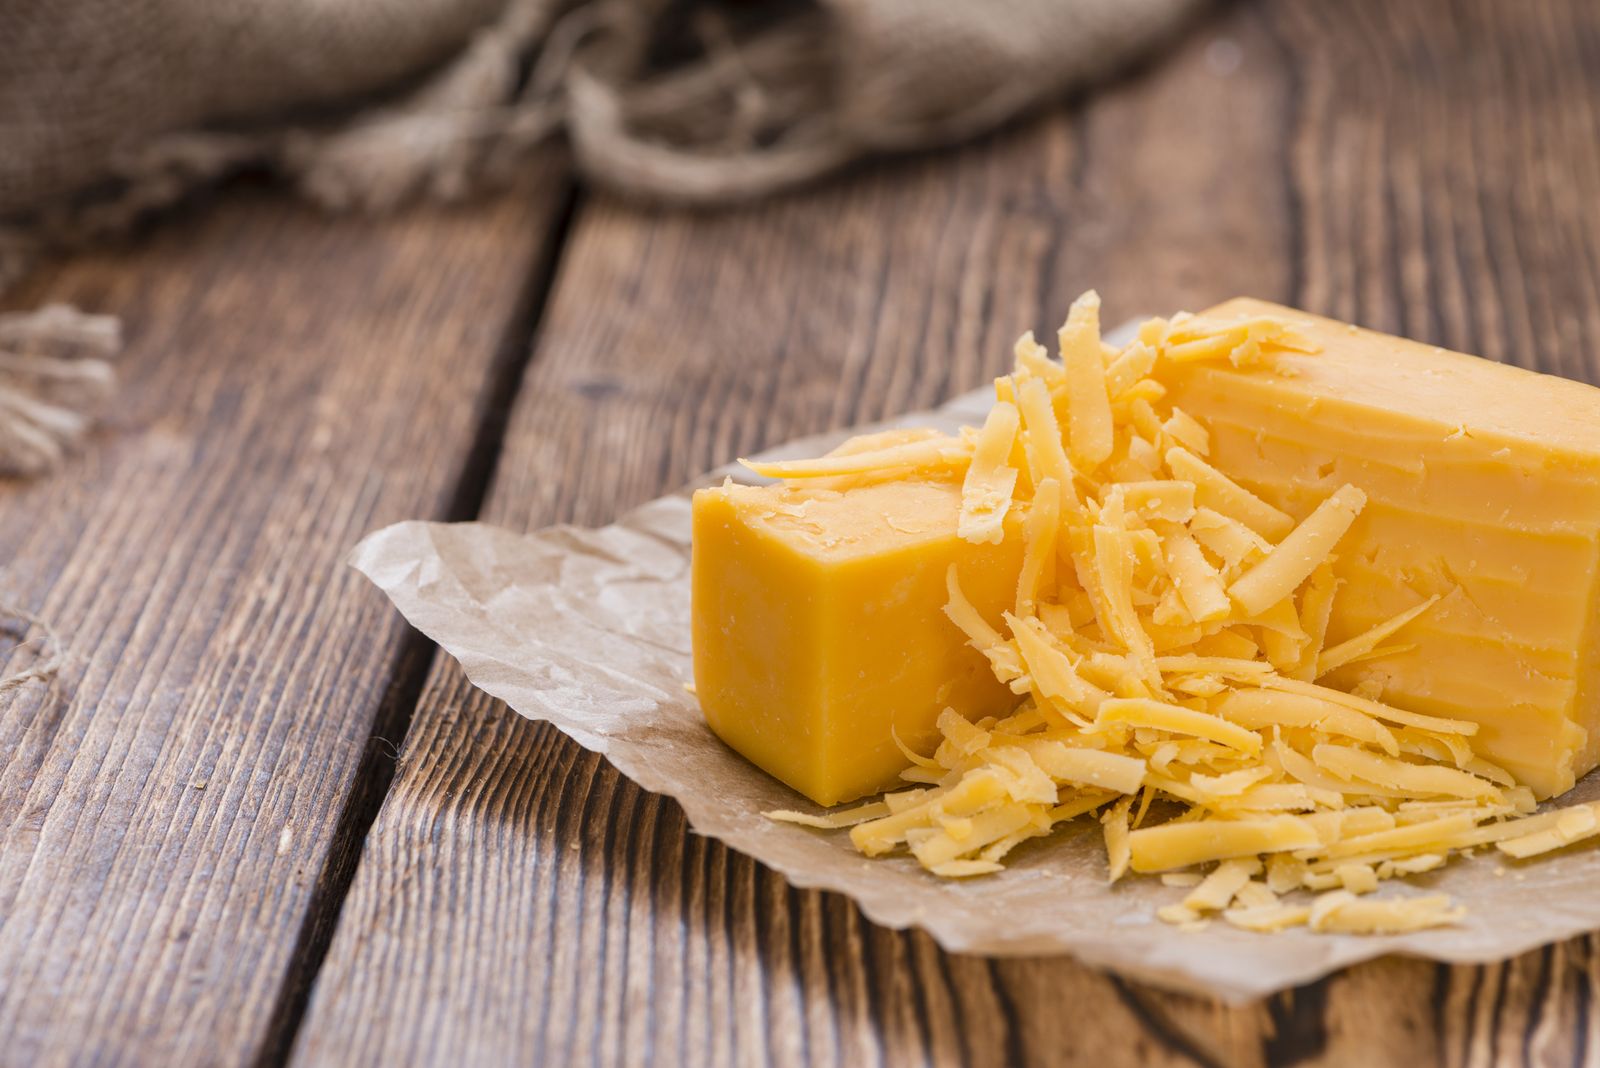 All About Cheddar: What It Is and How To Use It